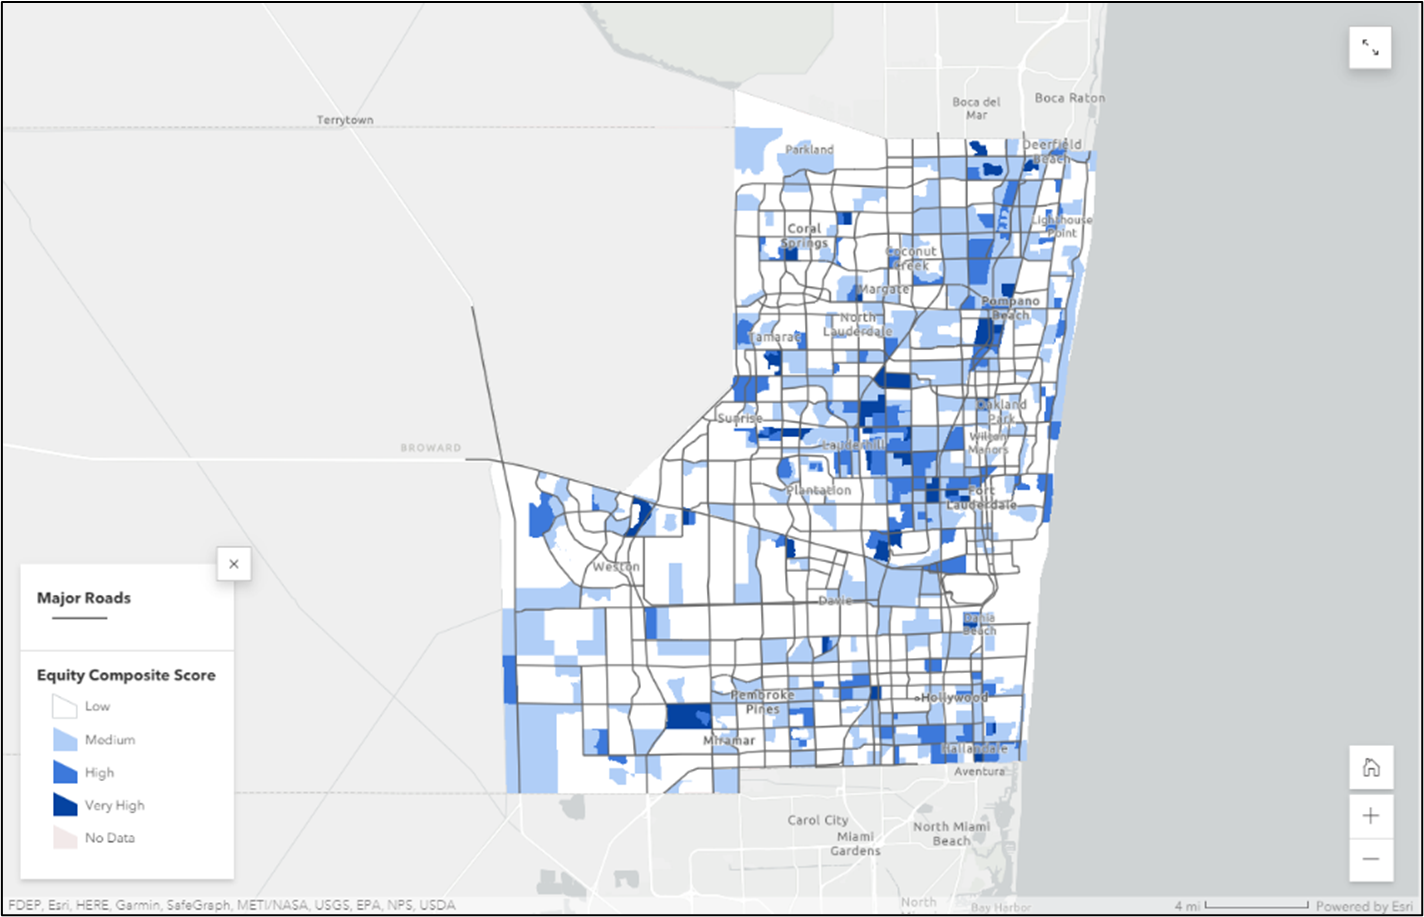 Screenshot of the Equity Composite Score Map from the Transportation Planning Equity Assessment Tool StoryMap